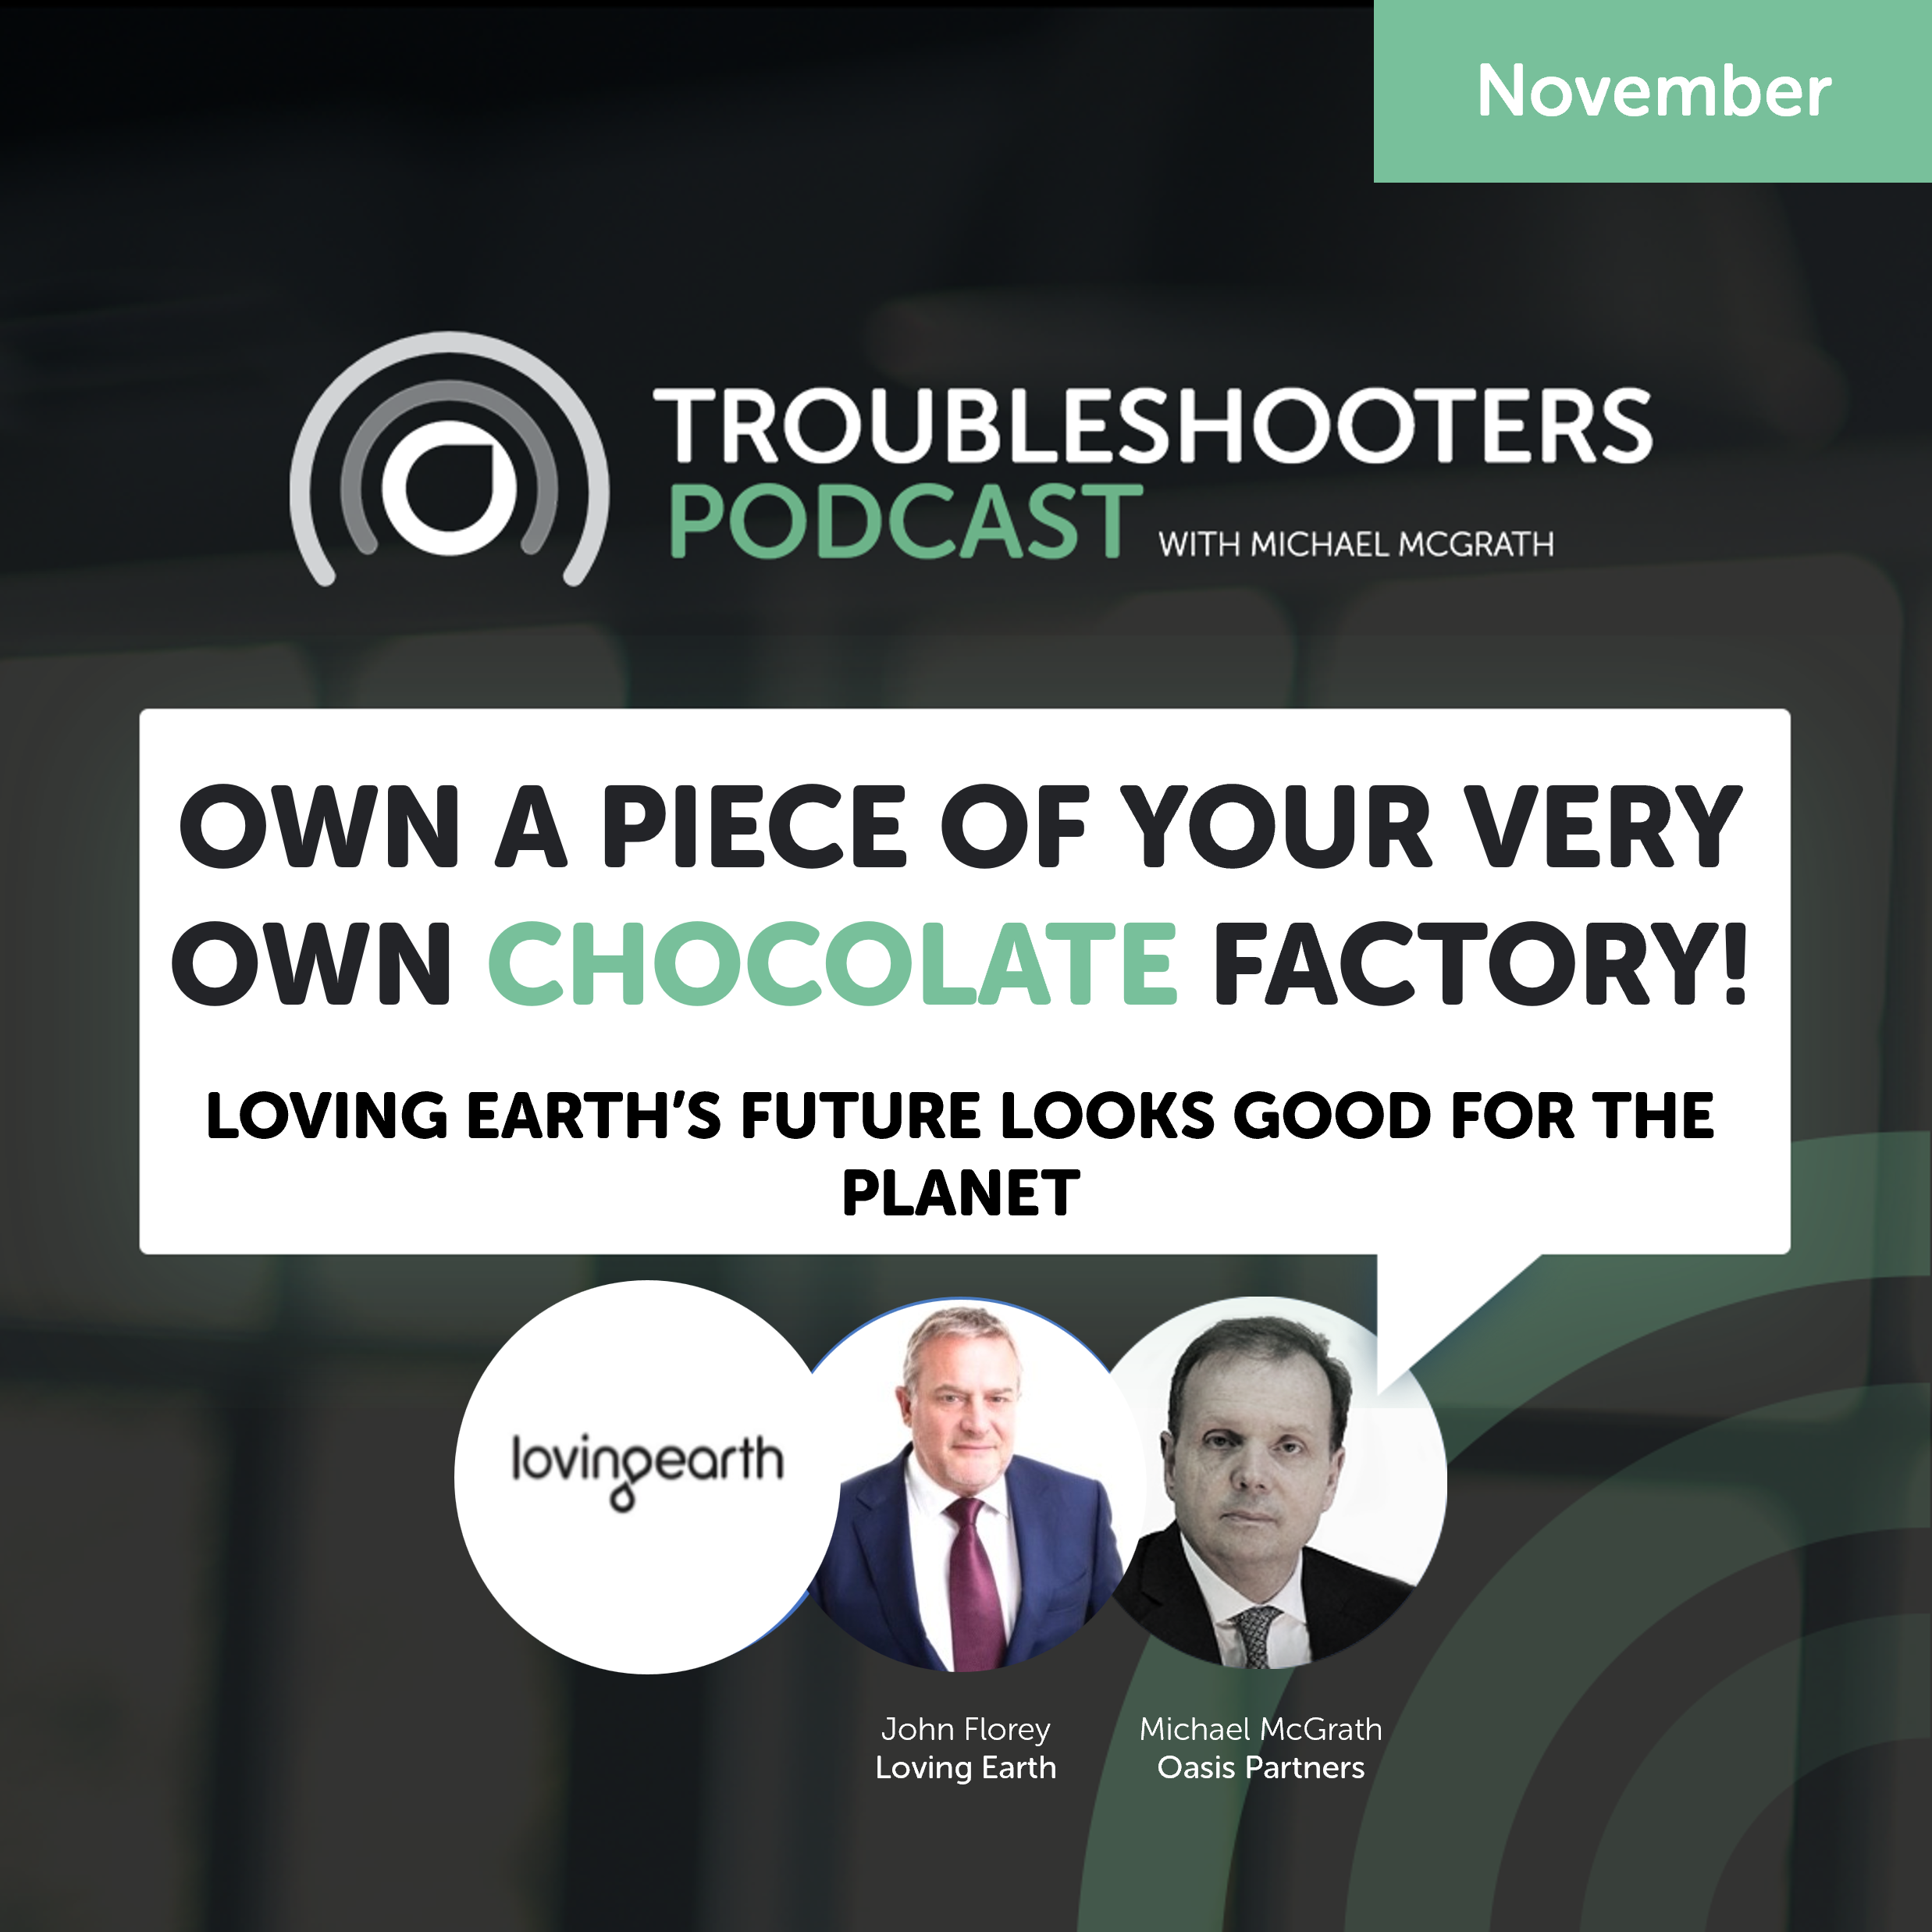 Own a Piece of Your Very Own Chocolate Factory!